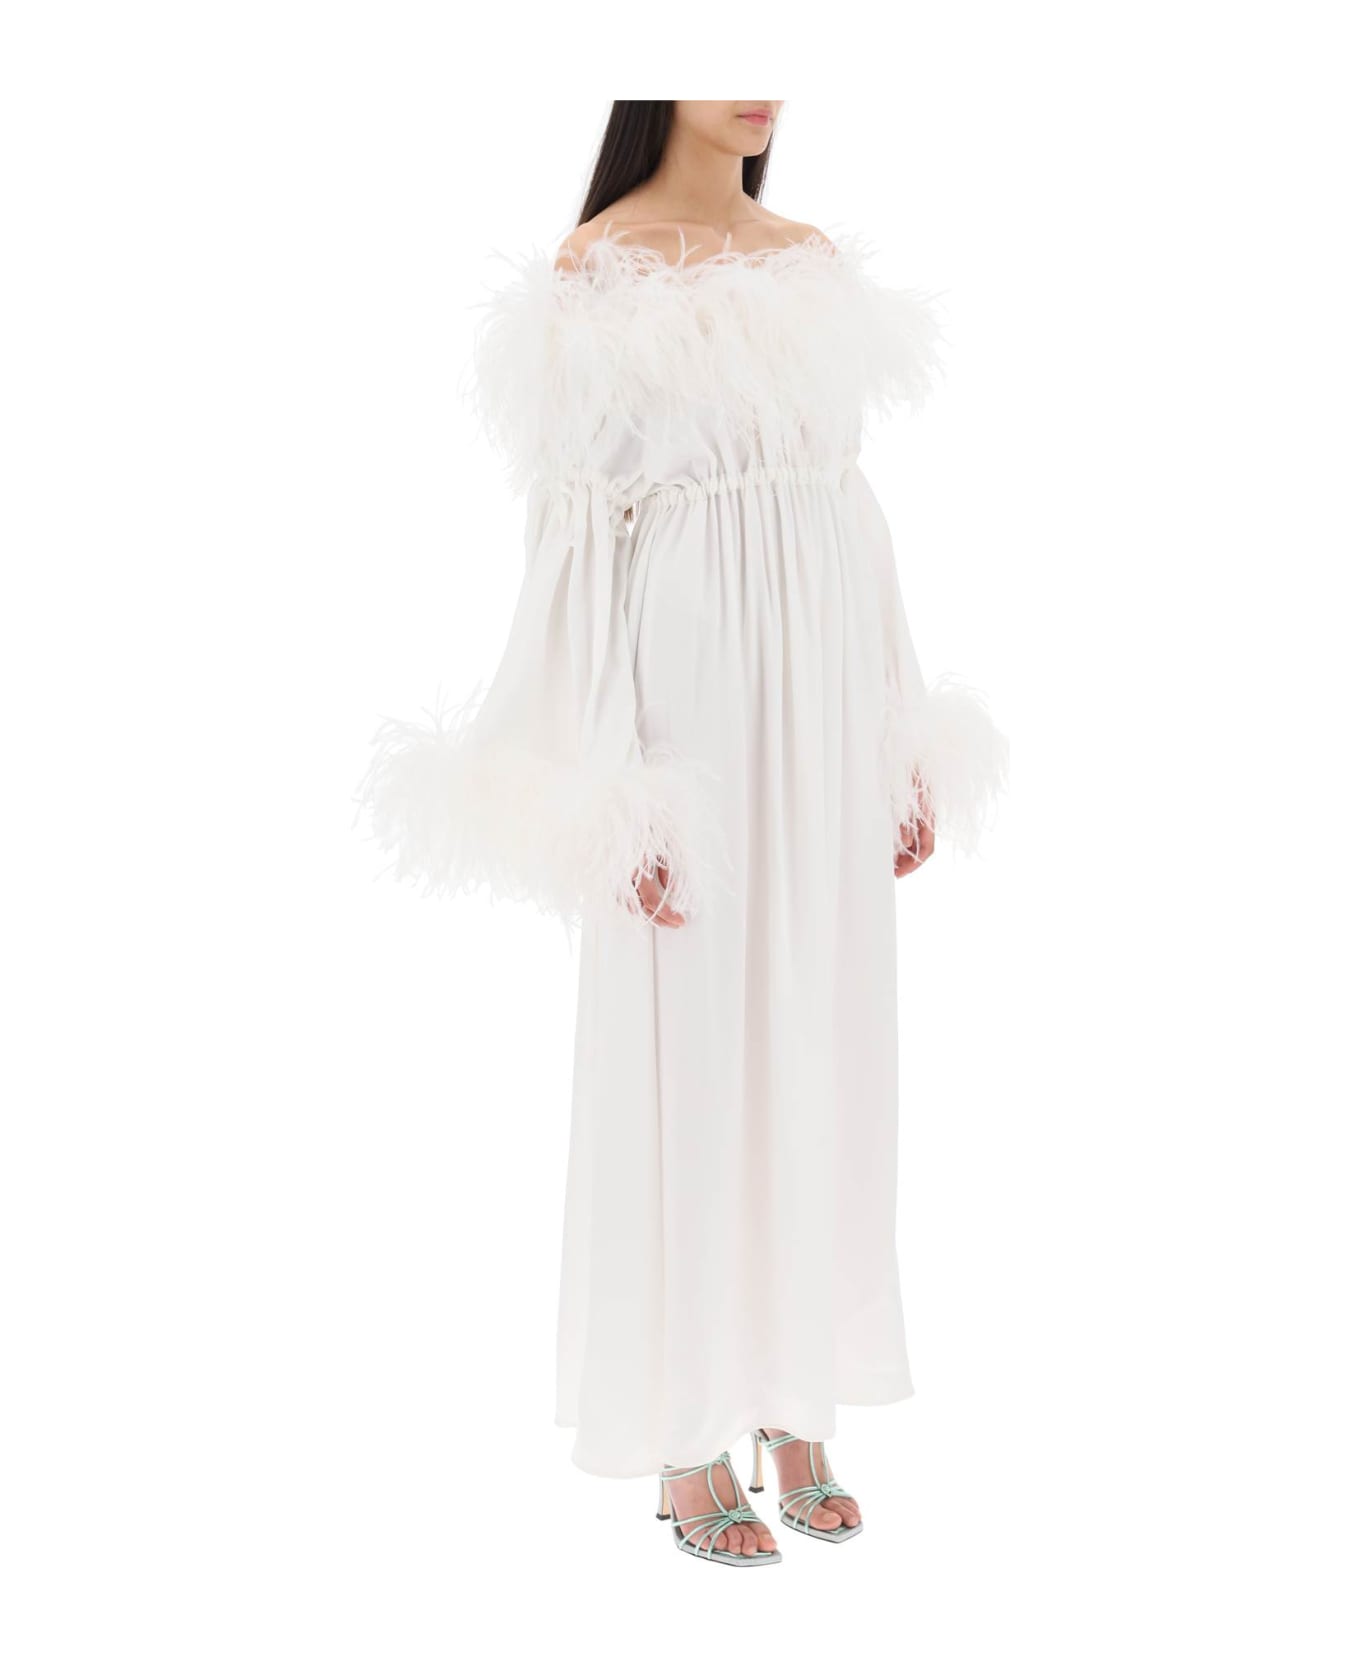 Art Dealer 'bettina' Maxi Dress In Satin With Feathers - WHITE (White)